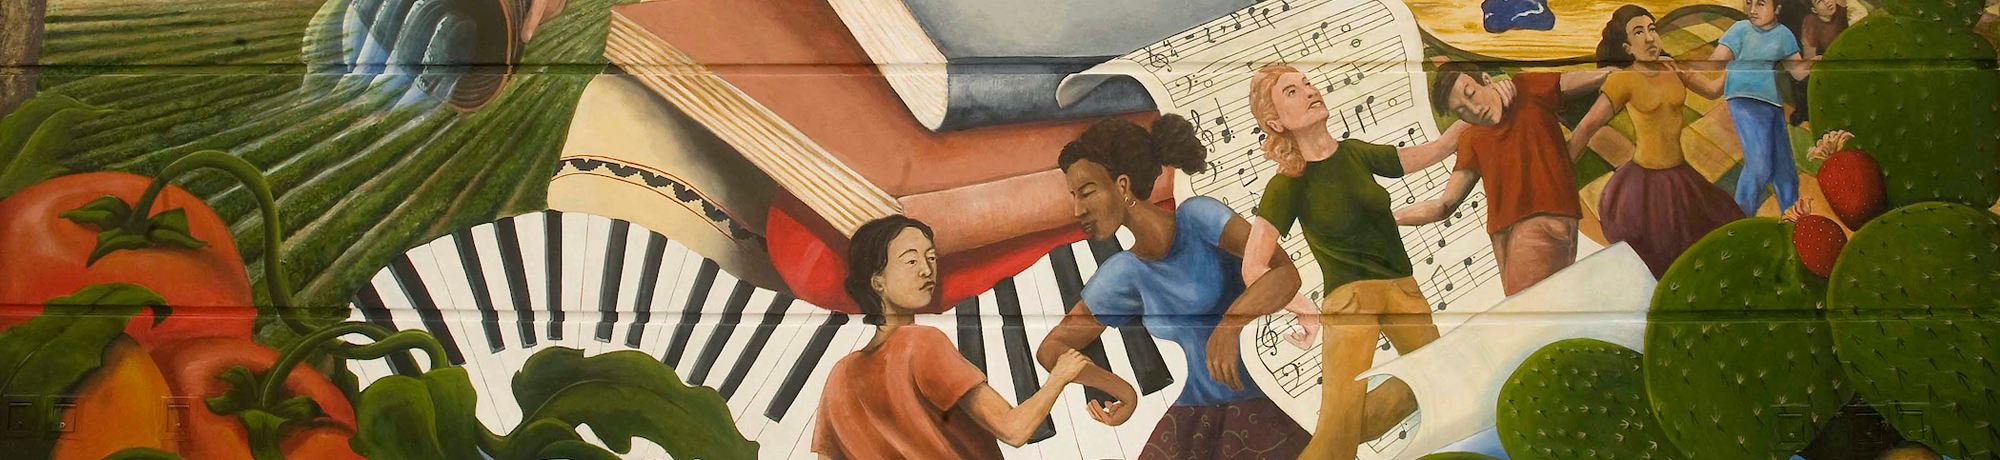 Mural of a woman and man facing opposite directions surrounded by books, music notes, piano keys, tomatoes, and children playing together